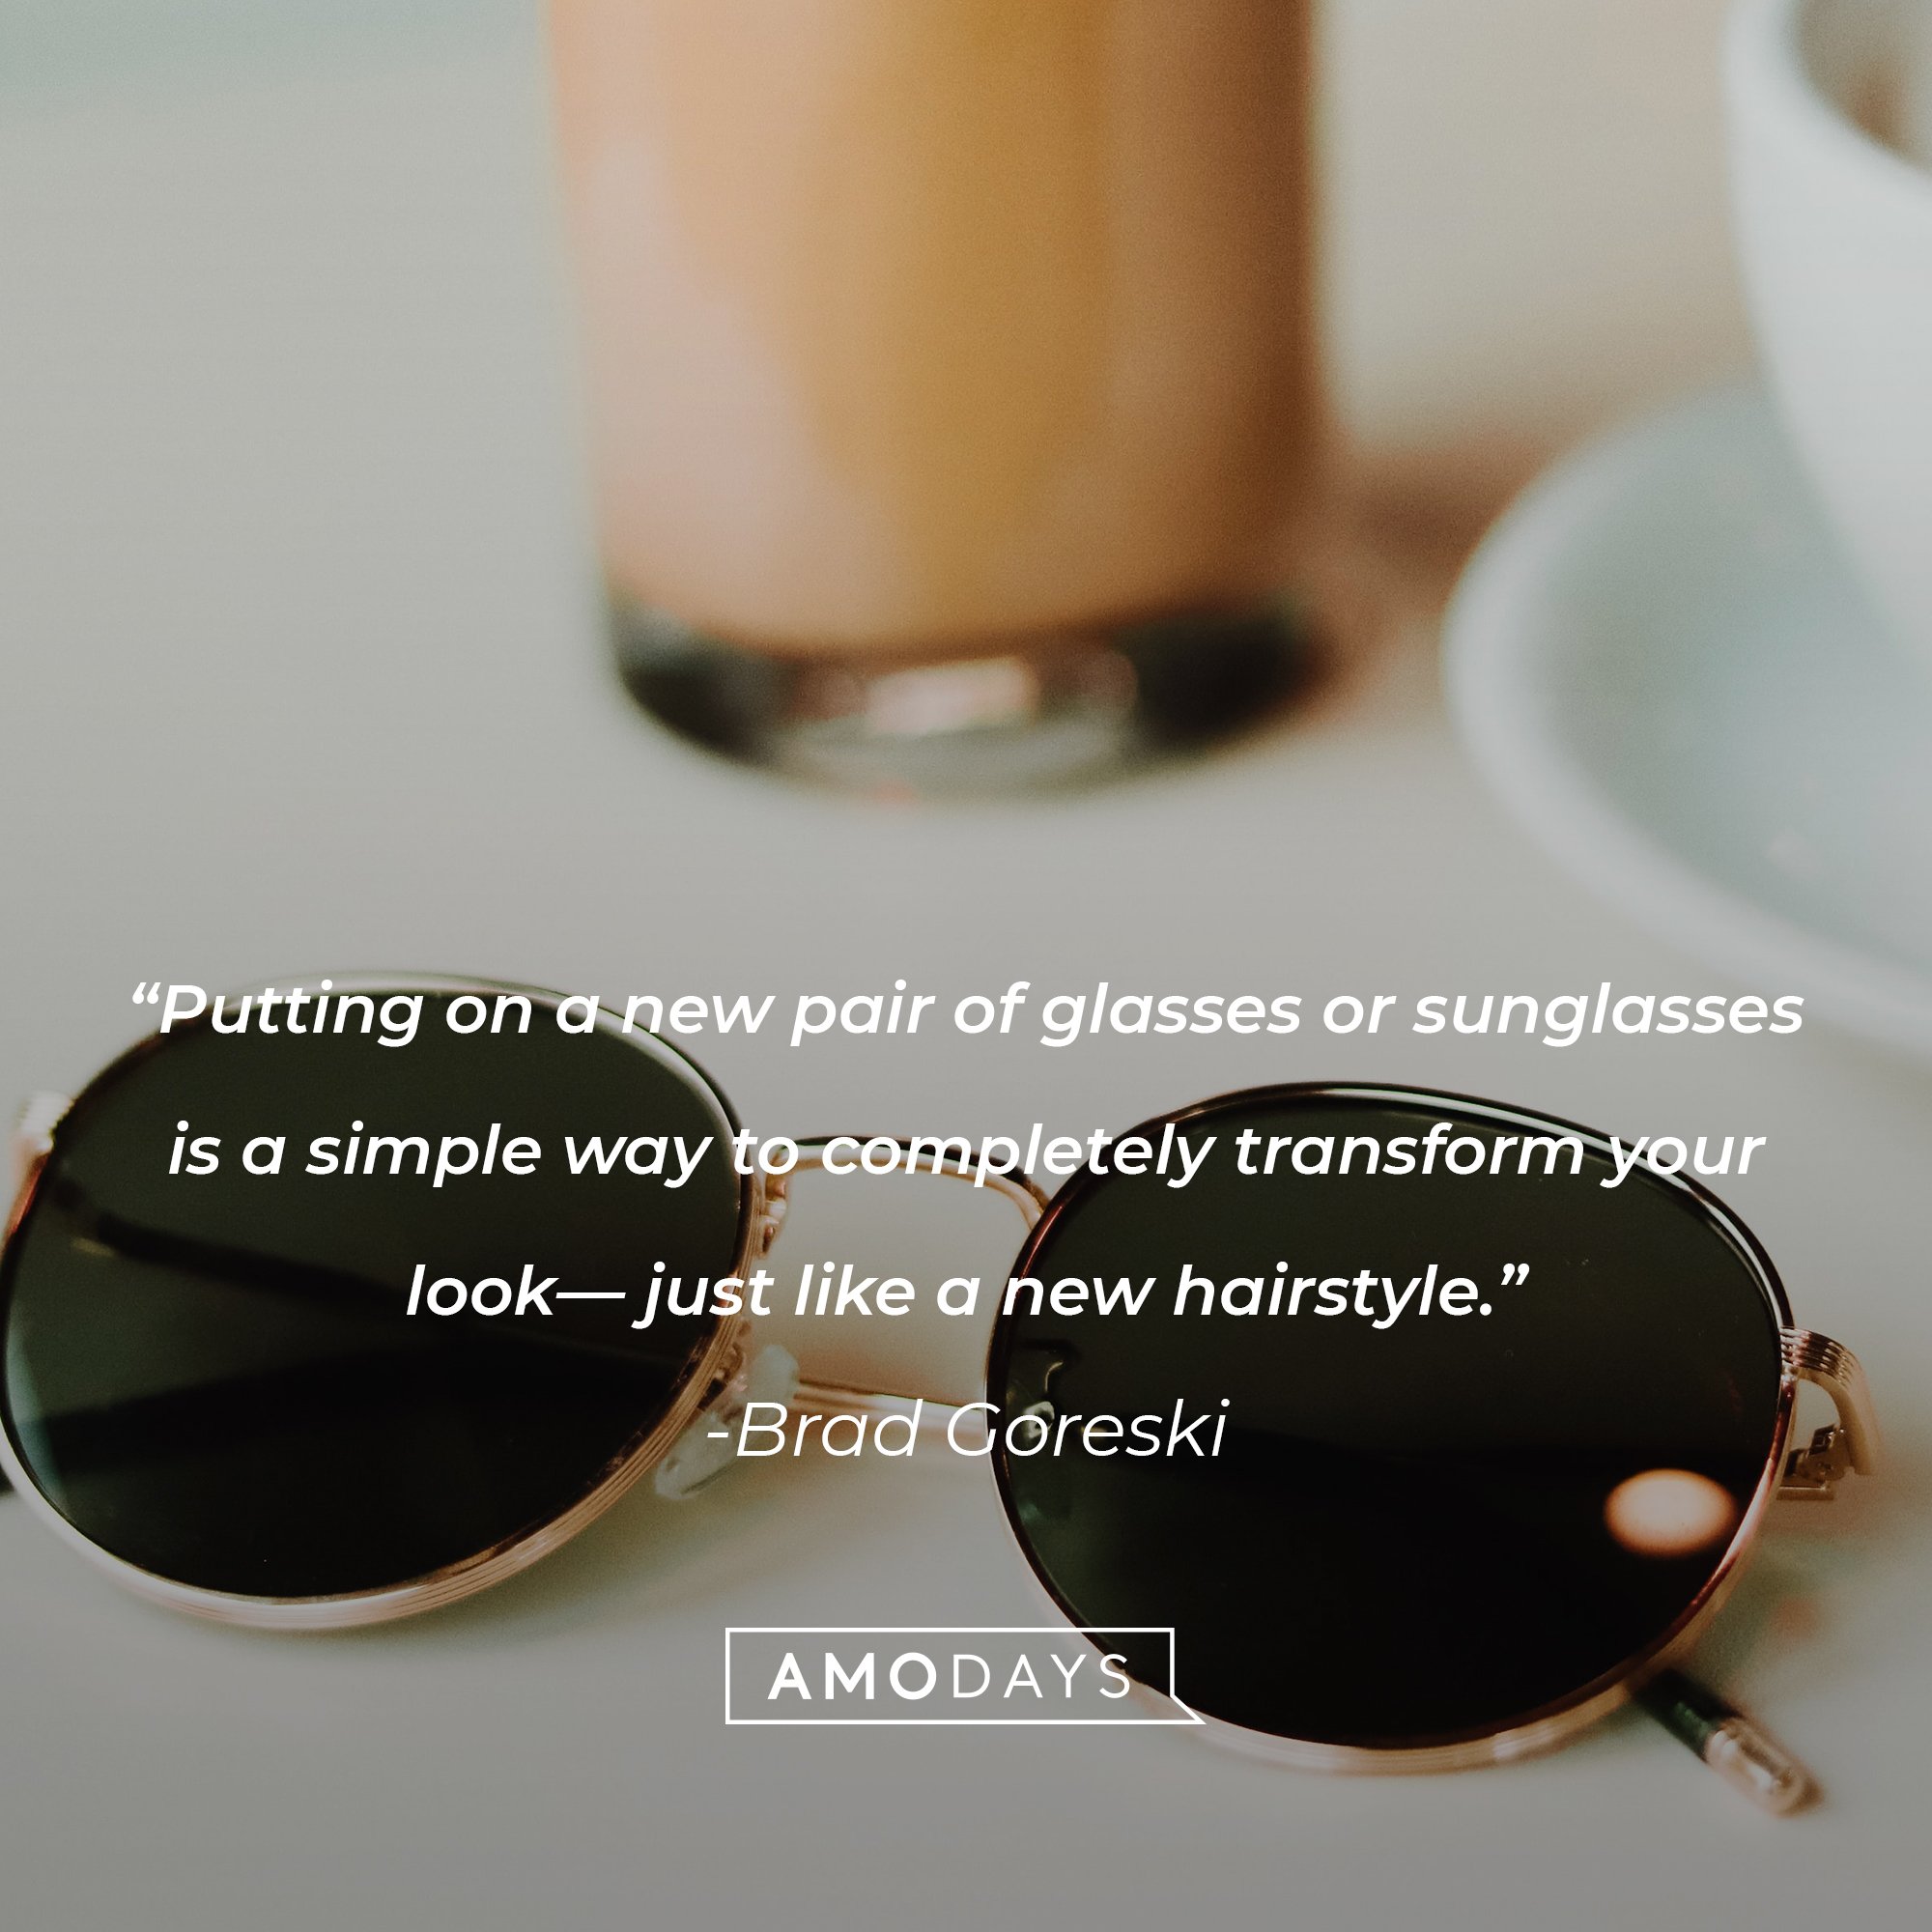 Brad Goreski’s quote: "Putting on a new pair of glasses or sunglasses is a simple way to completely transform your look— just like a new hairstyle." | Image: AmoDays